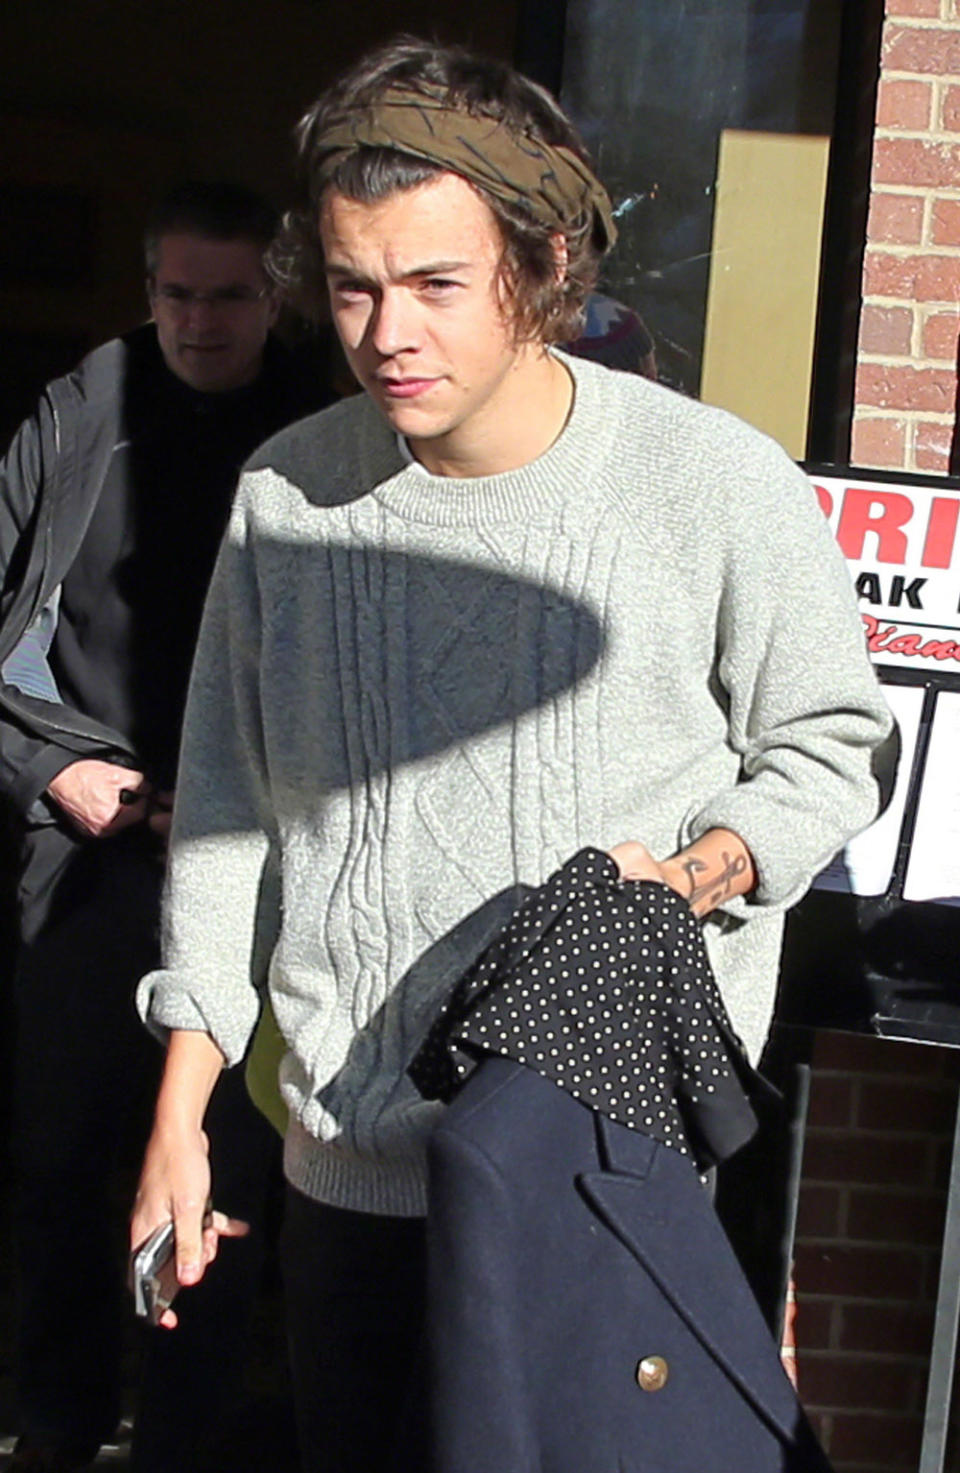 'Are You Hungry?' Harry Styles Offers Food To Paparazzi (WATCH)